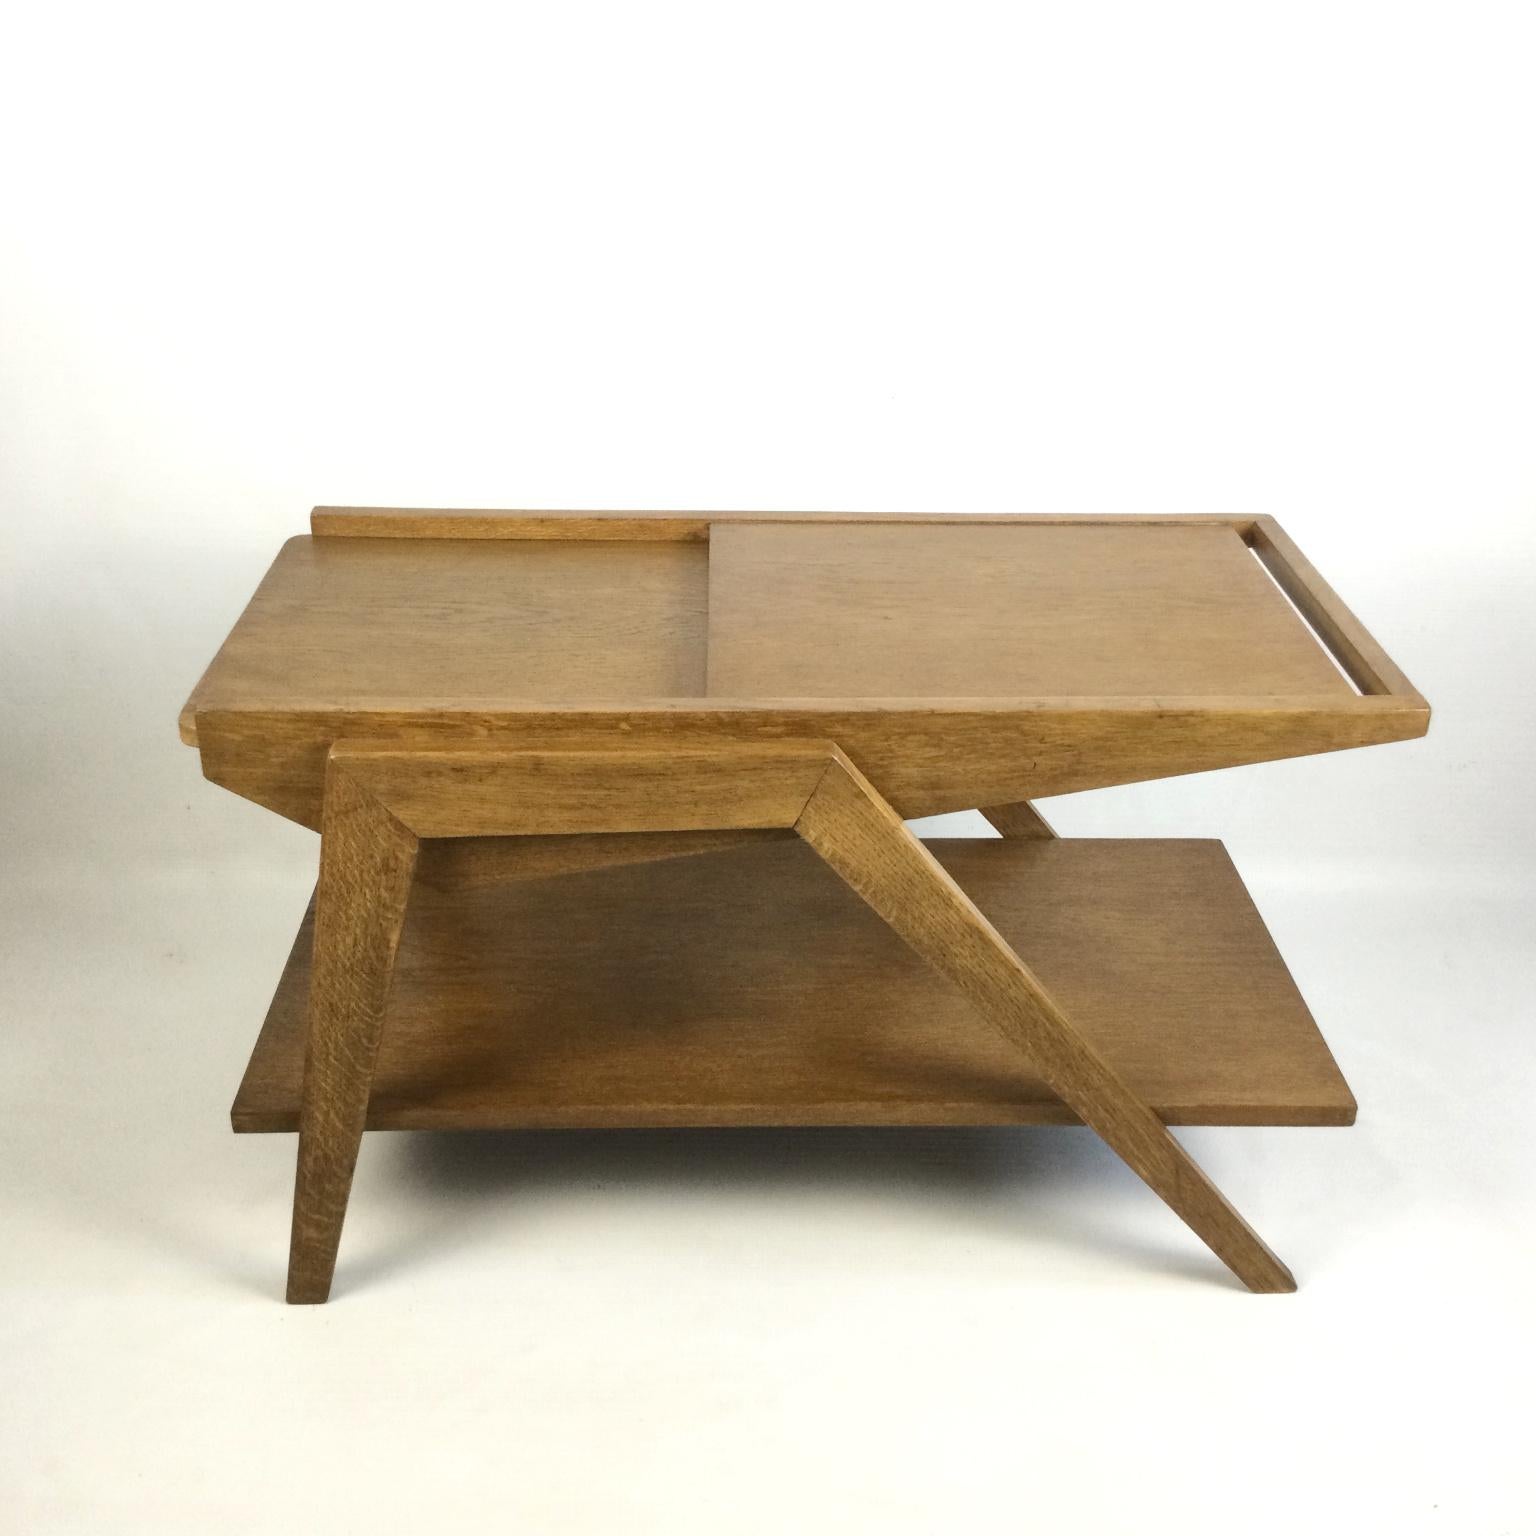 René-Jean Caillette (1919-2005) Original work table or sewing table in oak and oak veneer on two levels, with zoomorphic shape and feet, and also with a sliding top that covers a hidden compartment.
Can be used as a coffee table or side table.